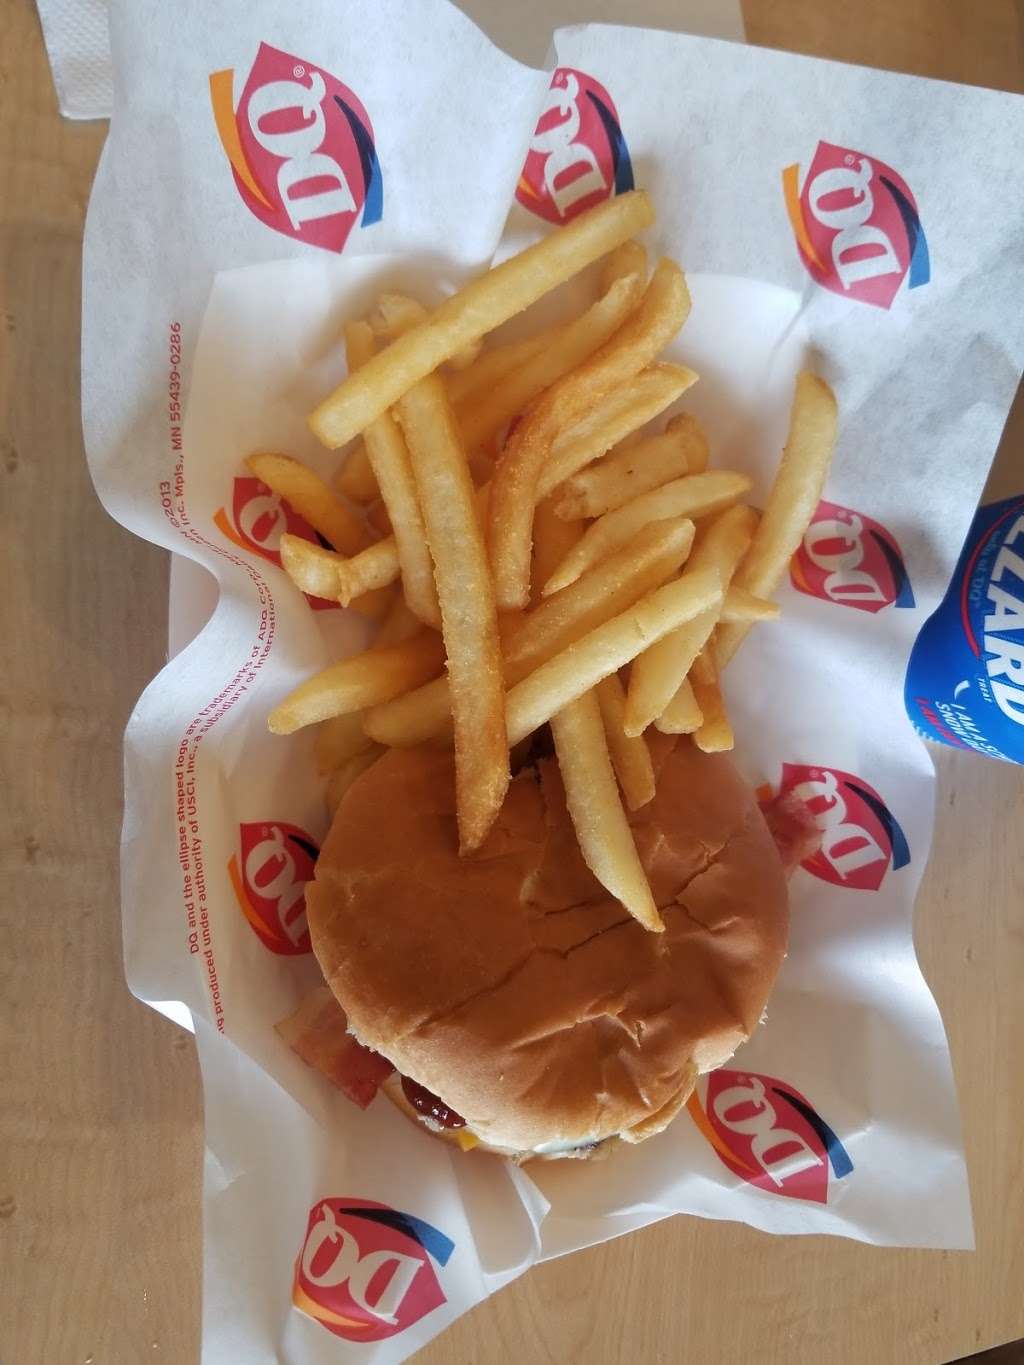 Dairy Queen Grill & Chill | 789 Seven Bridge Rd, East Stroudsburg, PA 18301 | Phone: (570) 420-9393